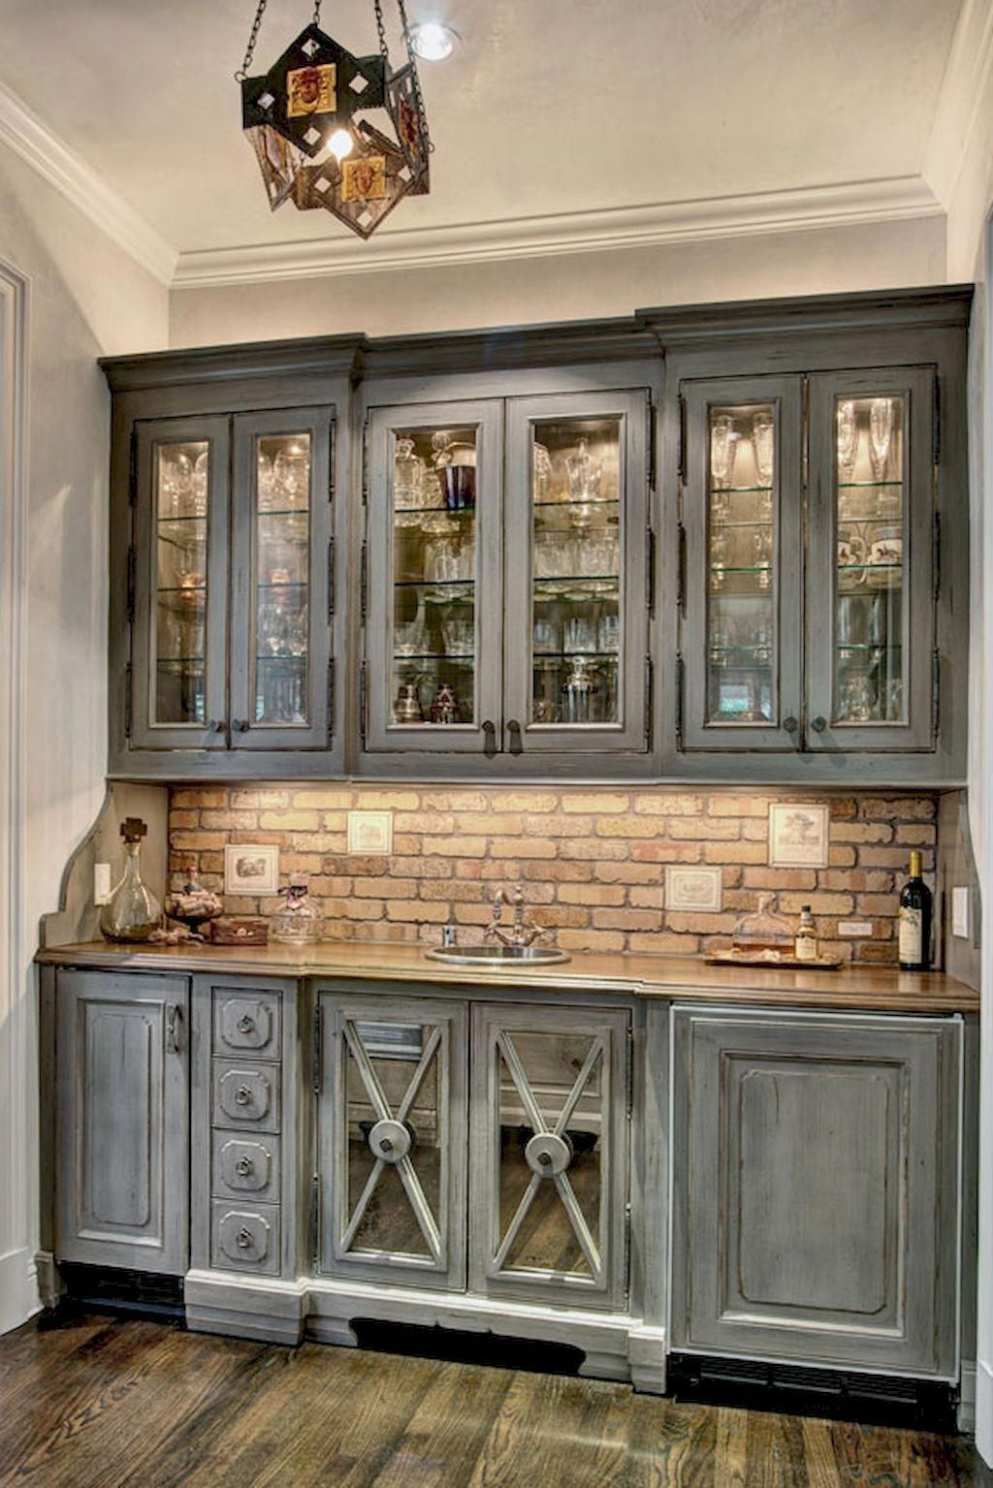 5+ Ways To Style Grey Kitchen Cabinets - antique gray kitchen cabinets